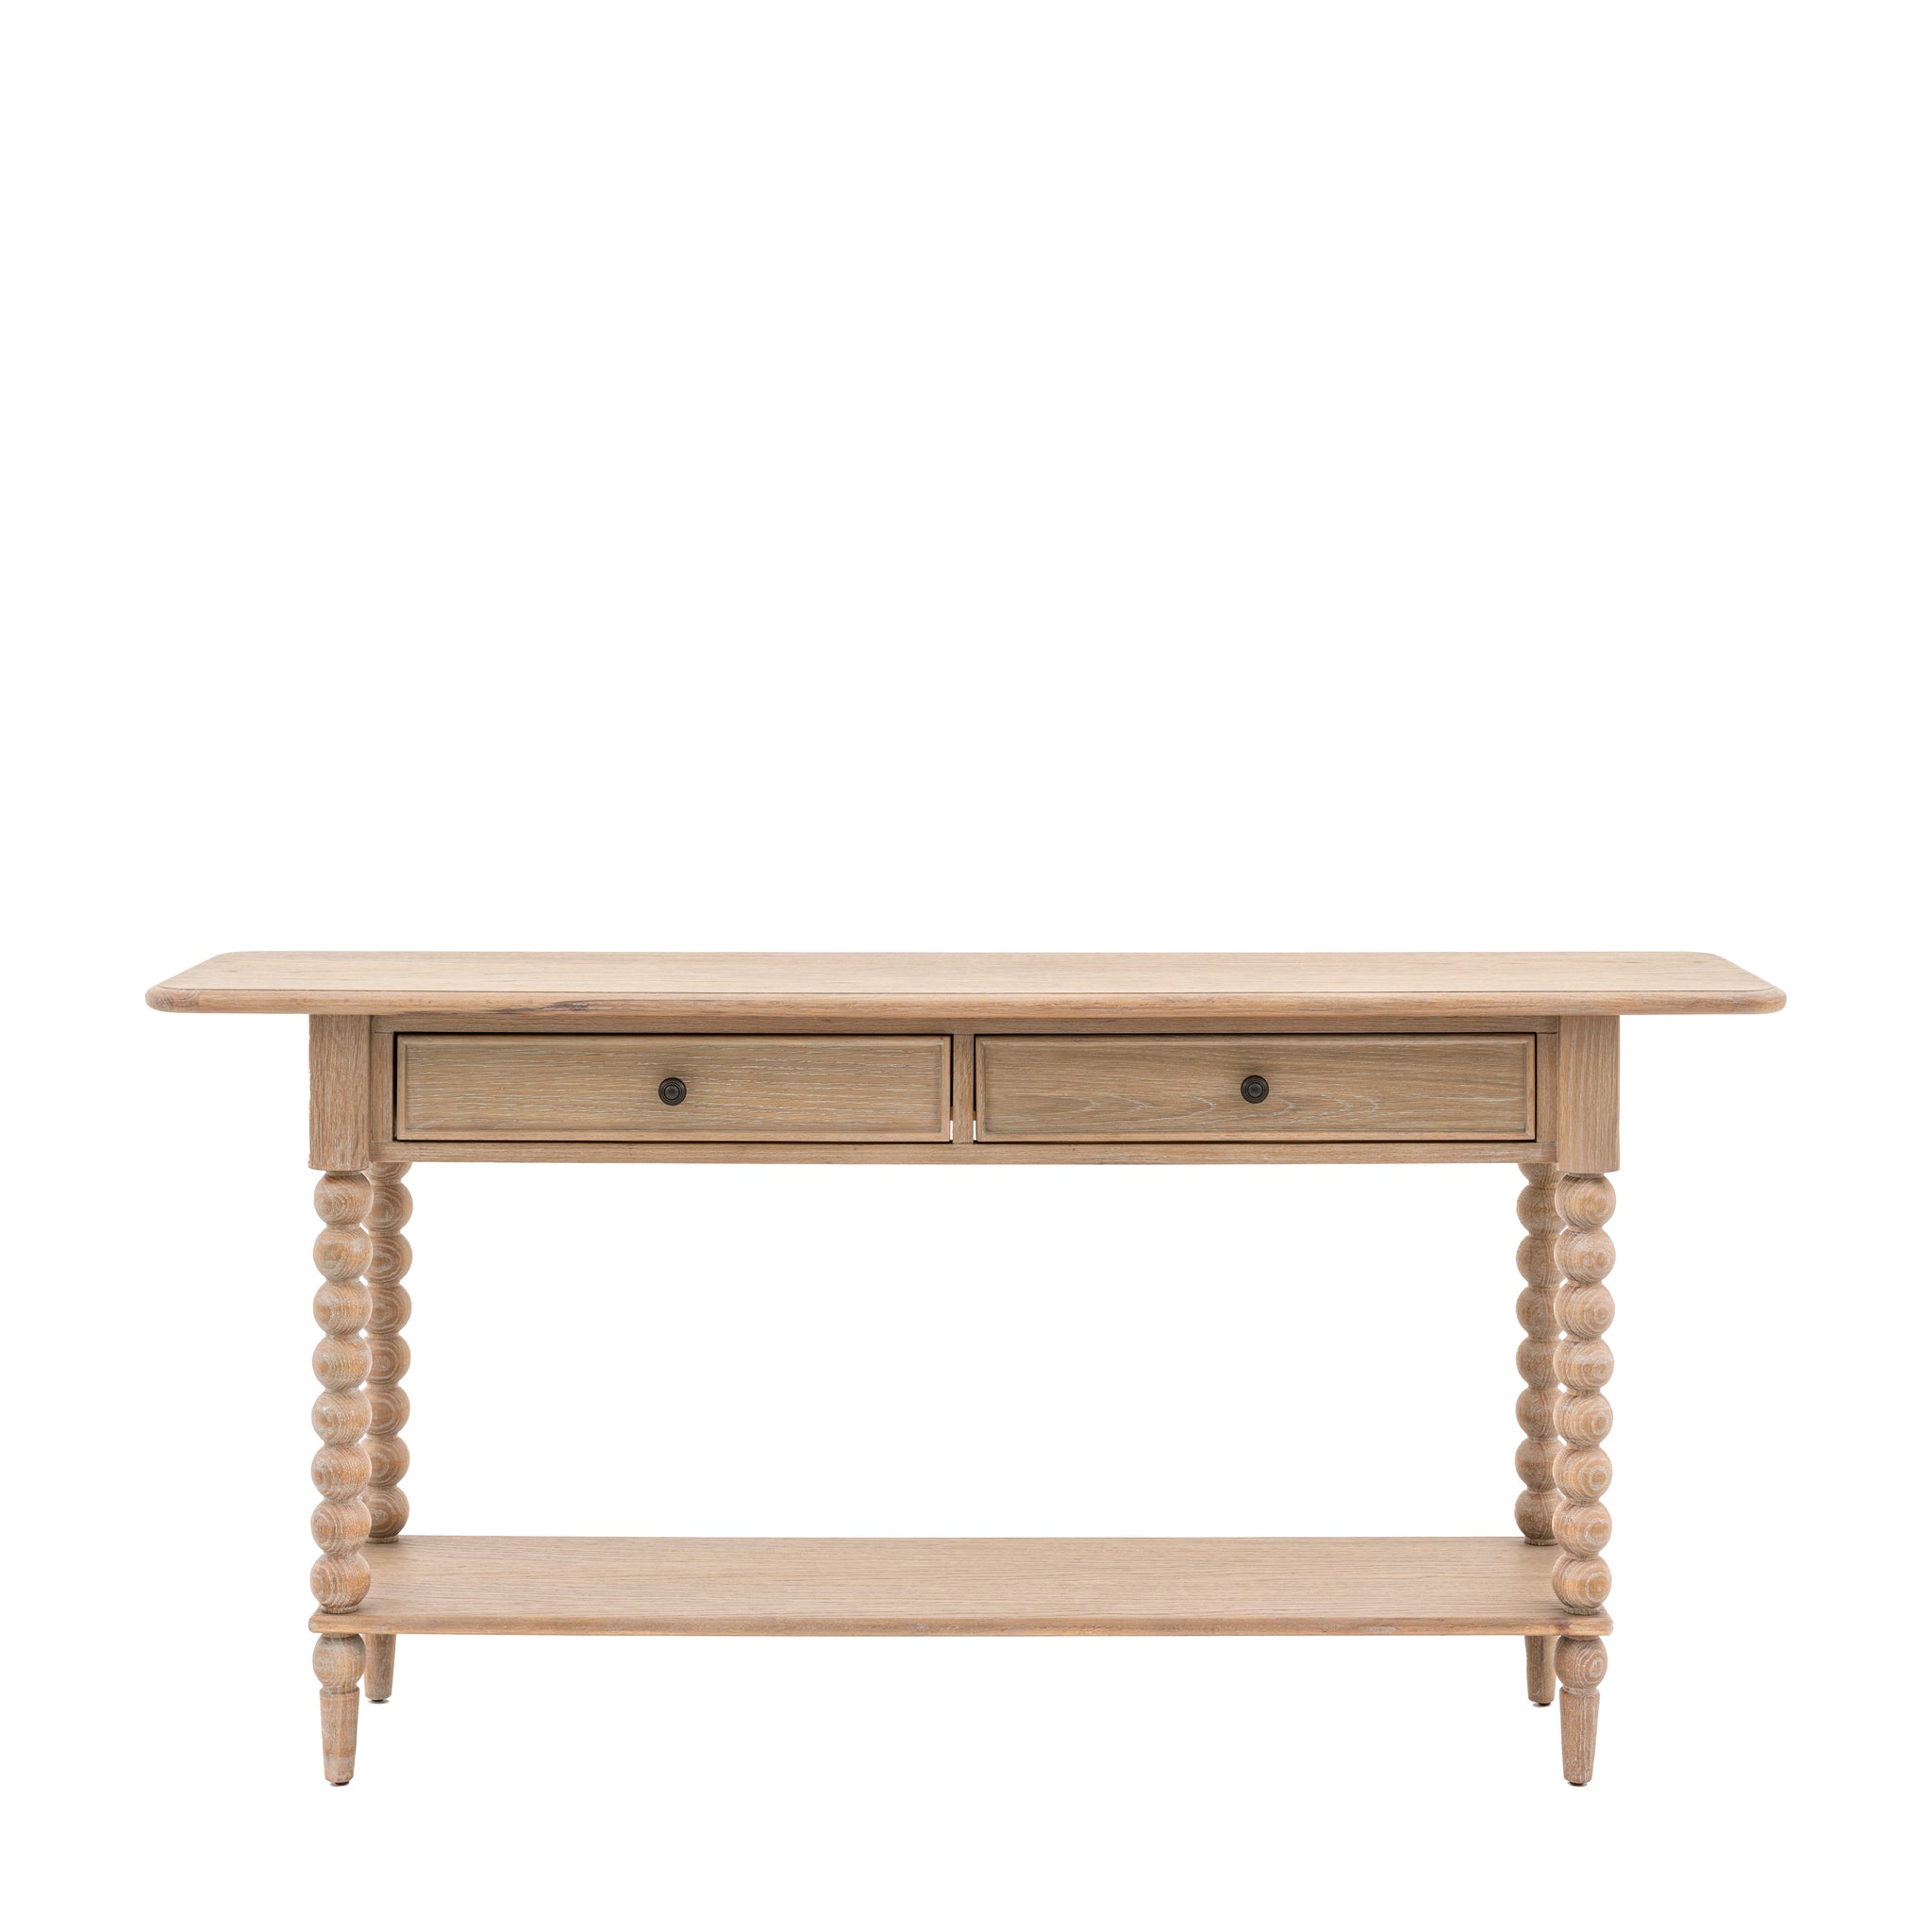 Artisa 2 Drawer Console Table